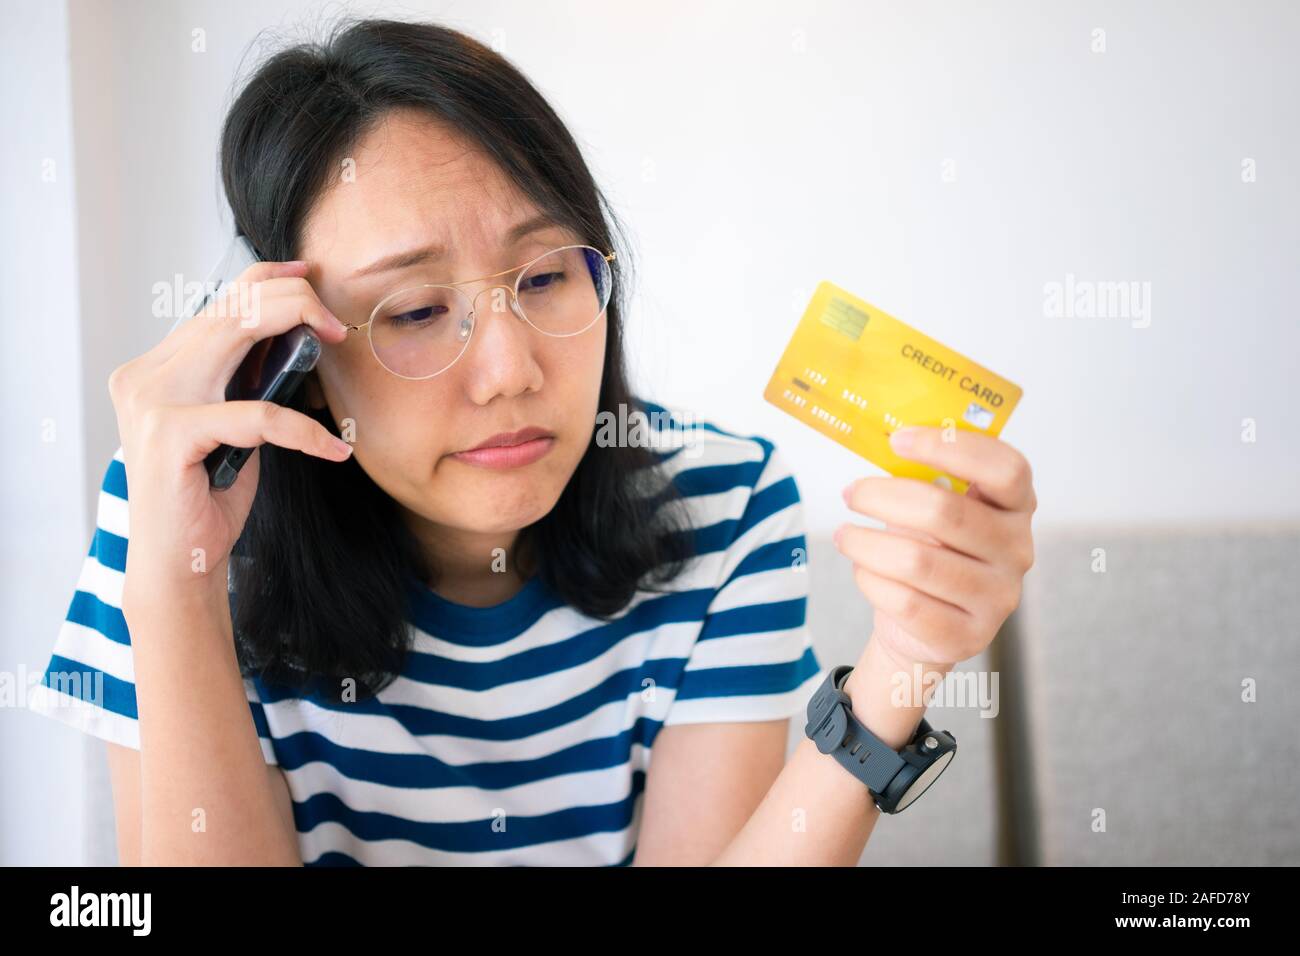 Confused Portrait Young Woman Holding Credit Cards Having Problem Online Payment With Credit 